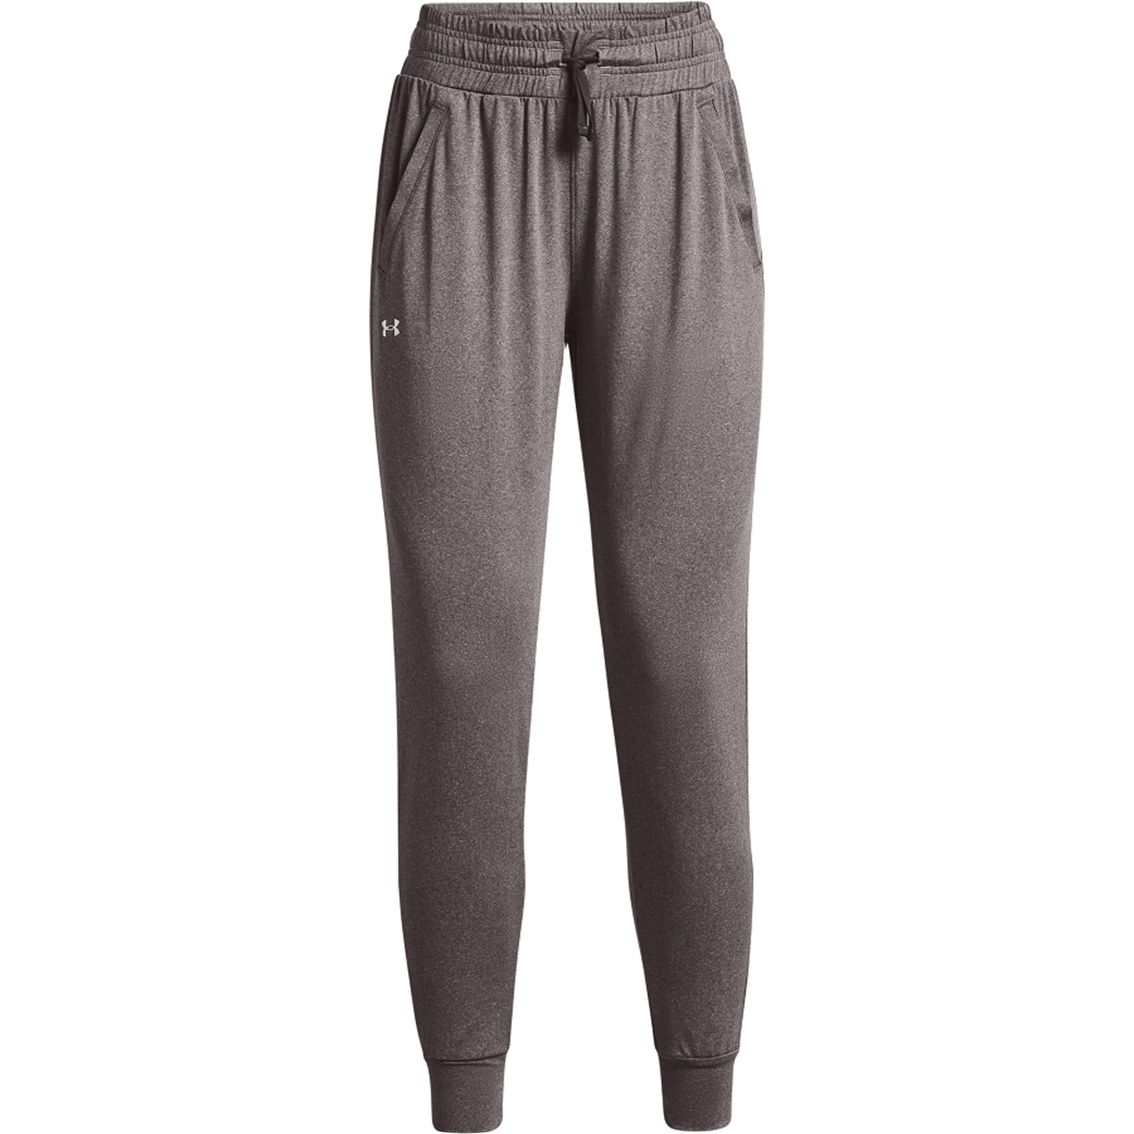 Under Armour New Fabric HG Armour Pants - Image 4 of 5